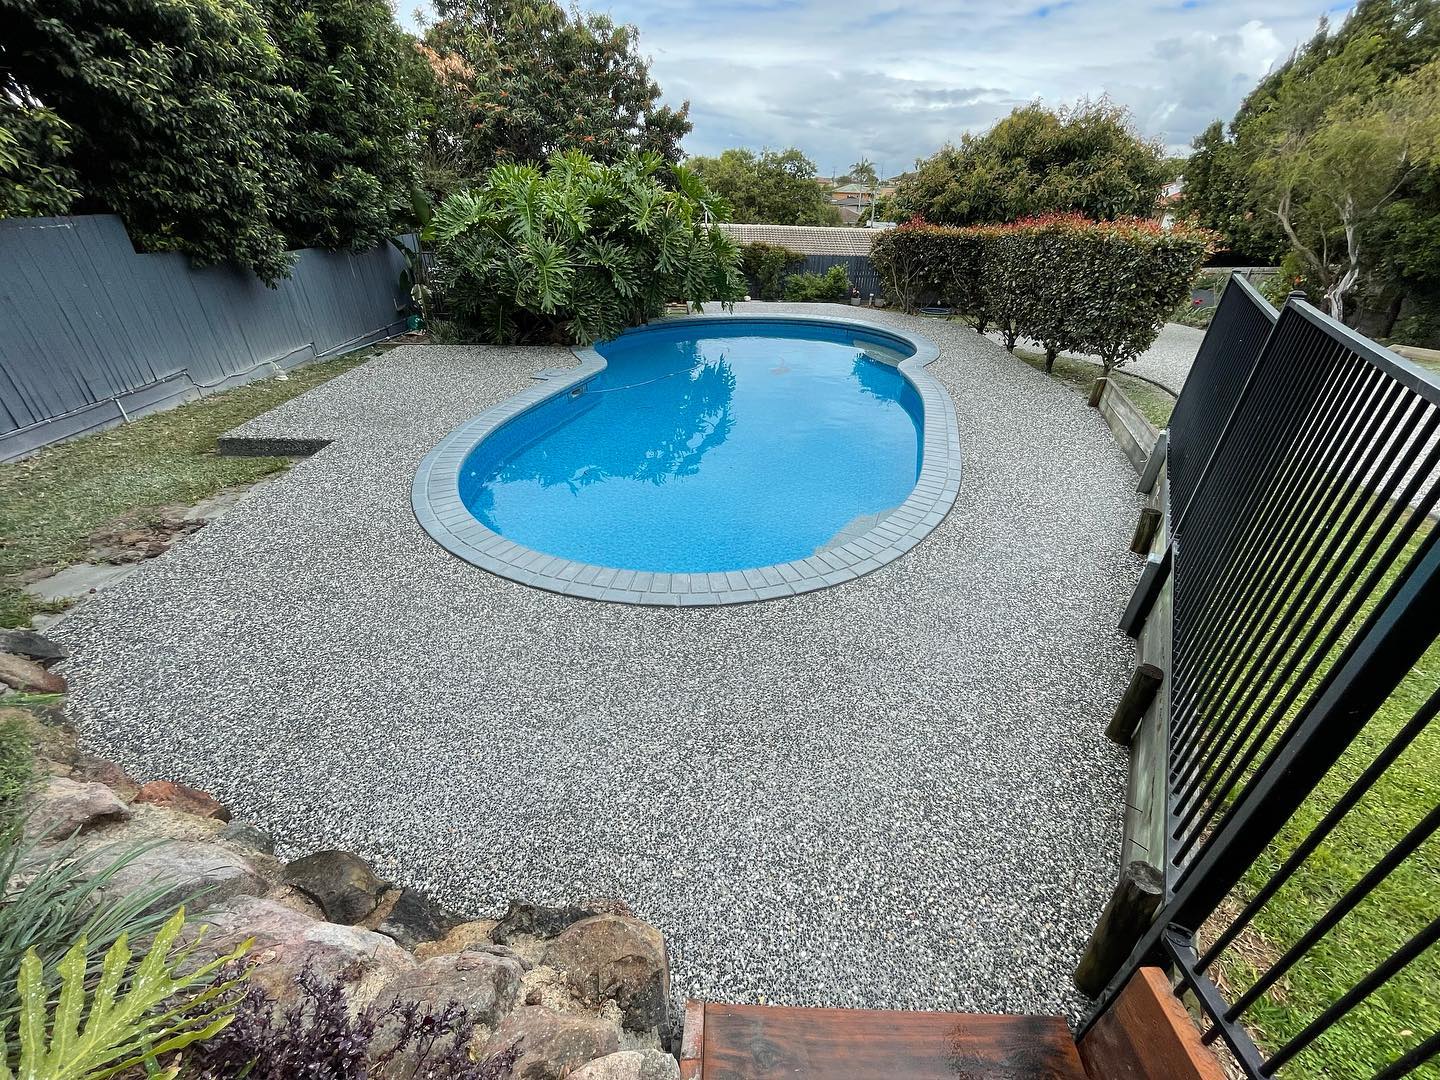 Pool surround concreting by Jack 